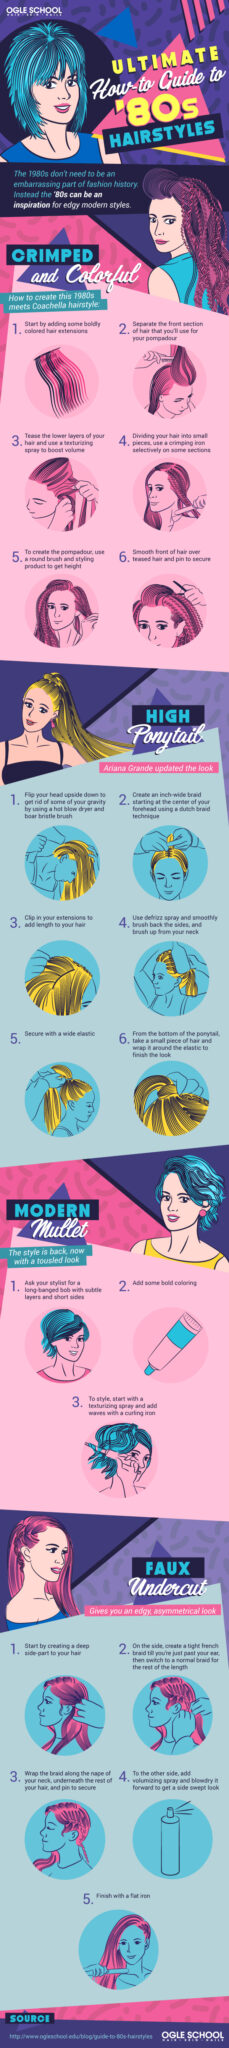 Ultimate How to Guide to 80s Hairstyles